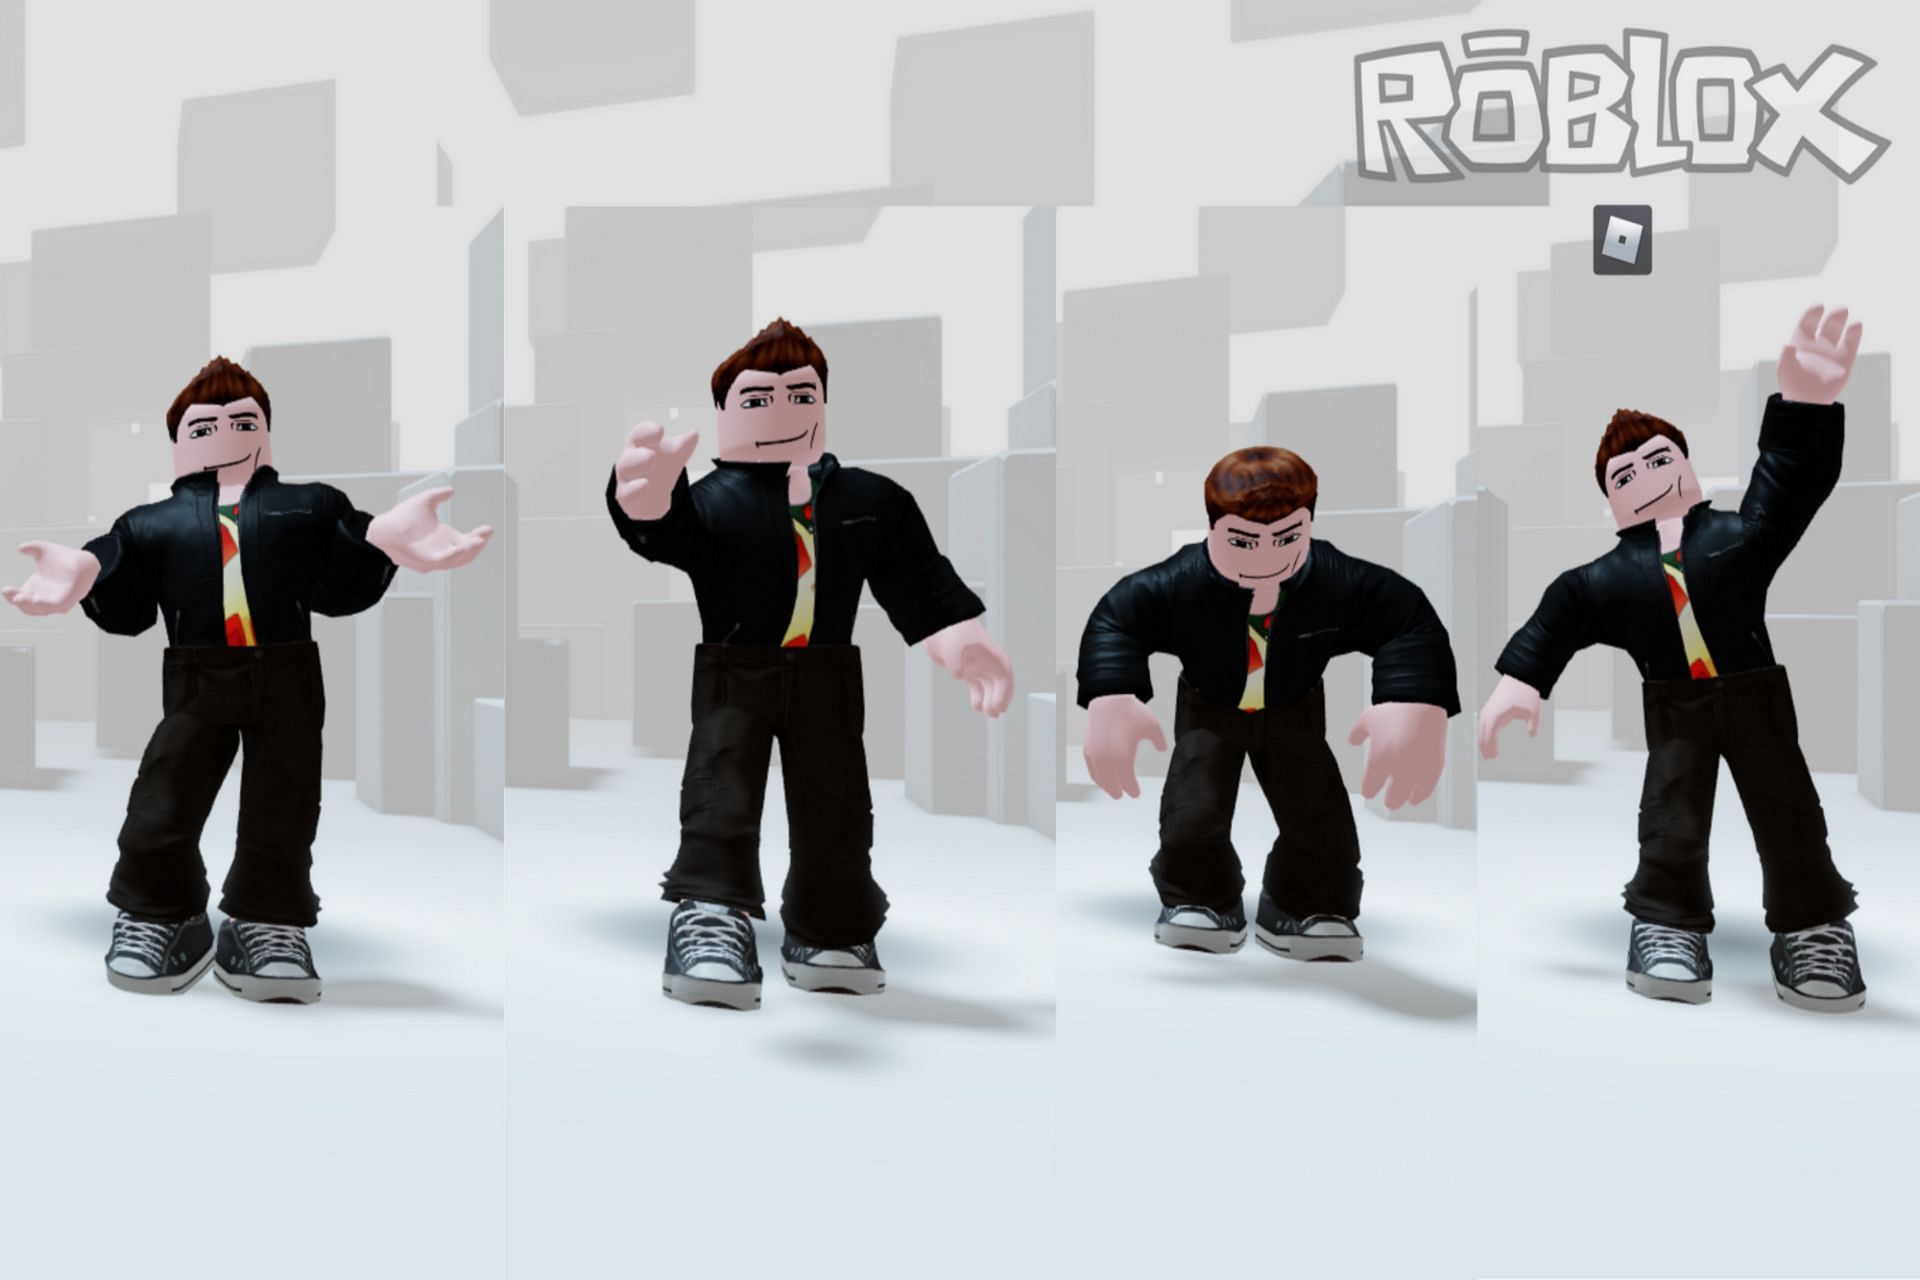 Download Customize Your Roblox Avatar Today